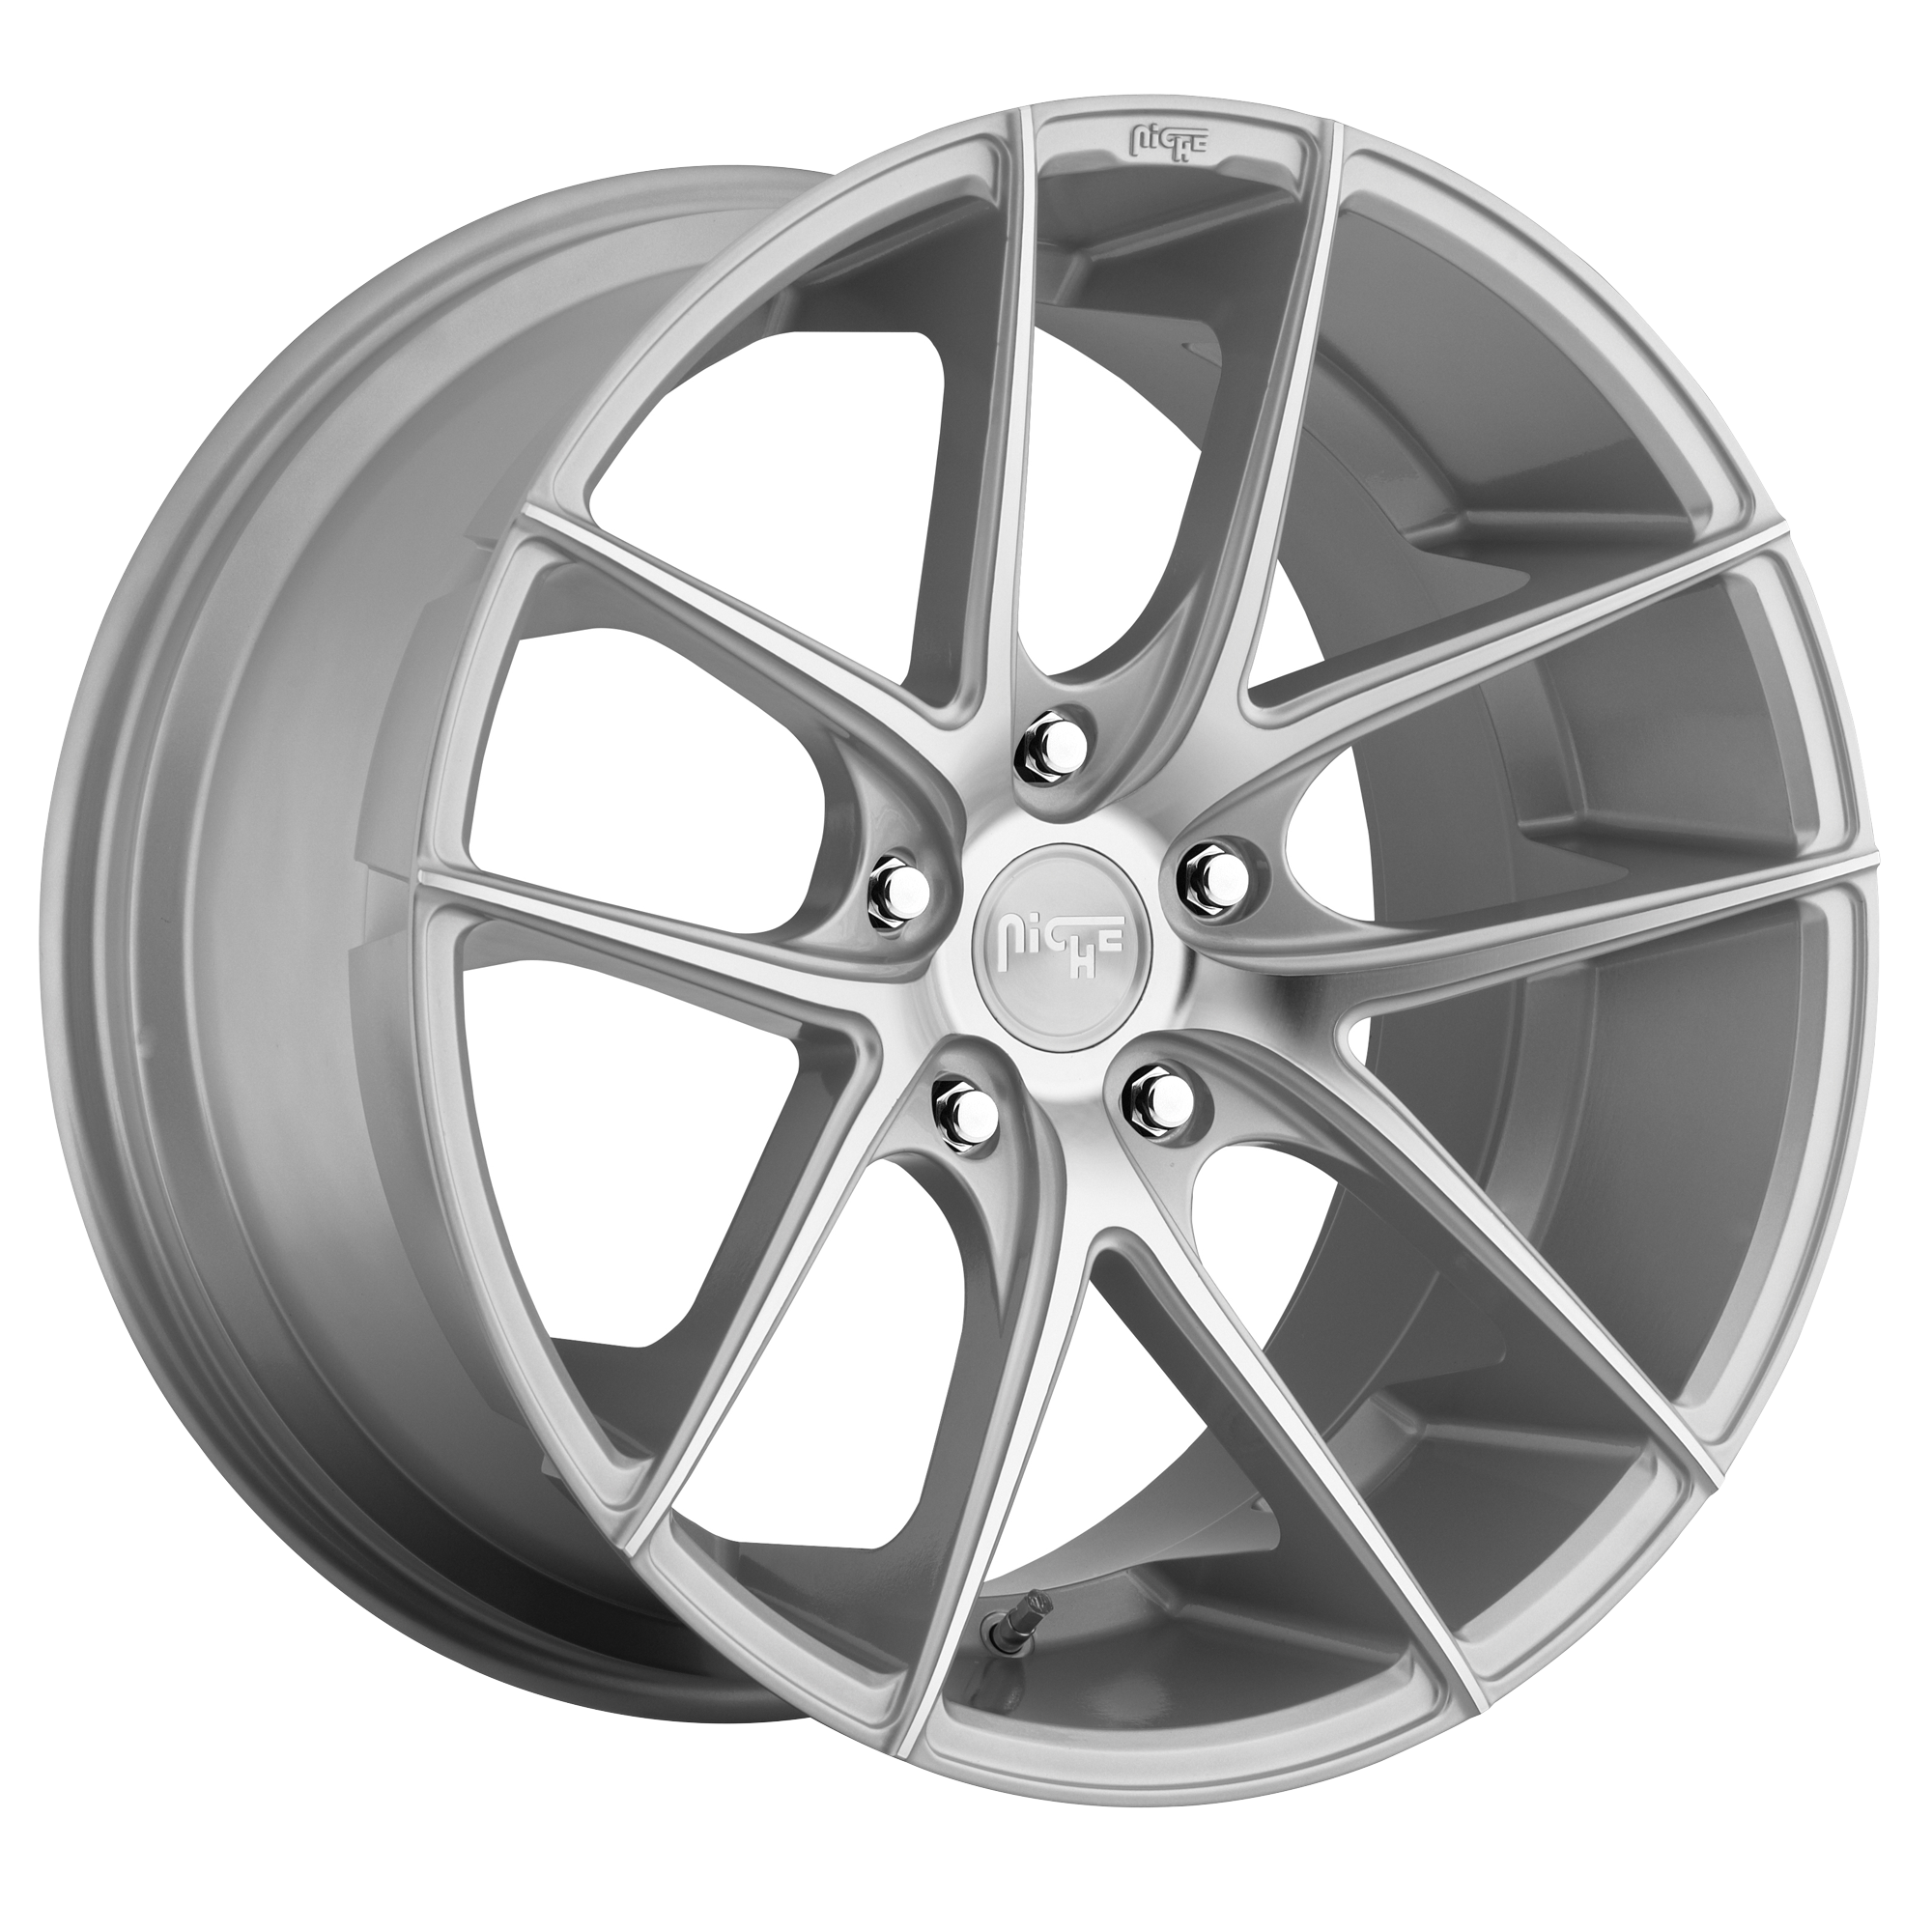 TARGA 20x8.5 5x108.00 GLOSS SILVER MACHINED (40 mm) - Tires and Engine Performance